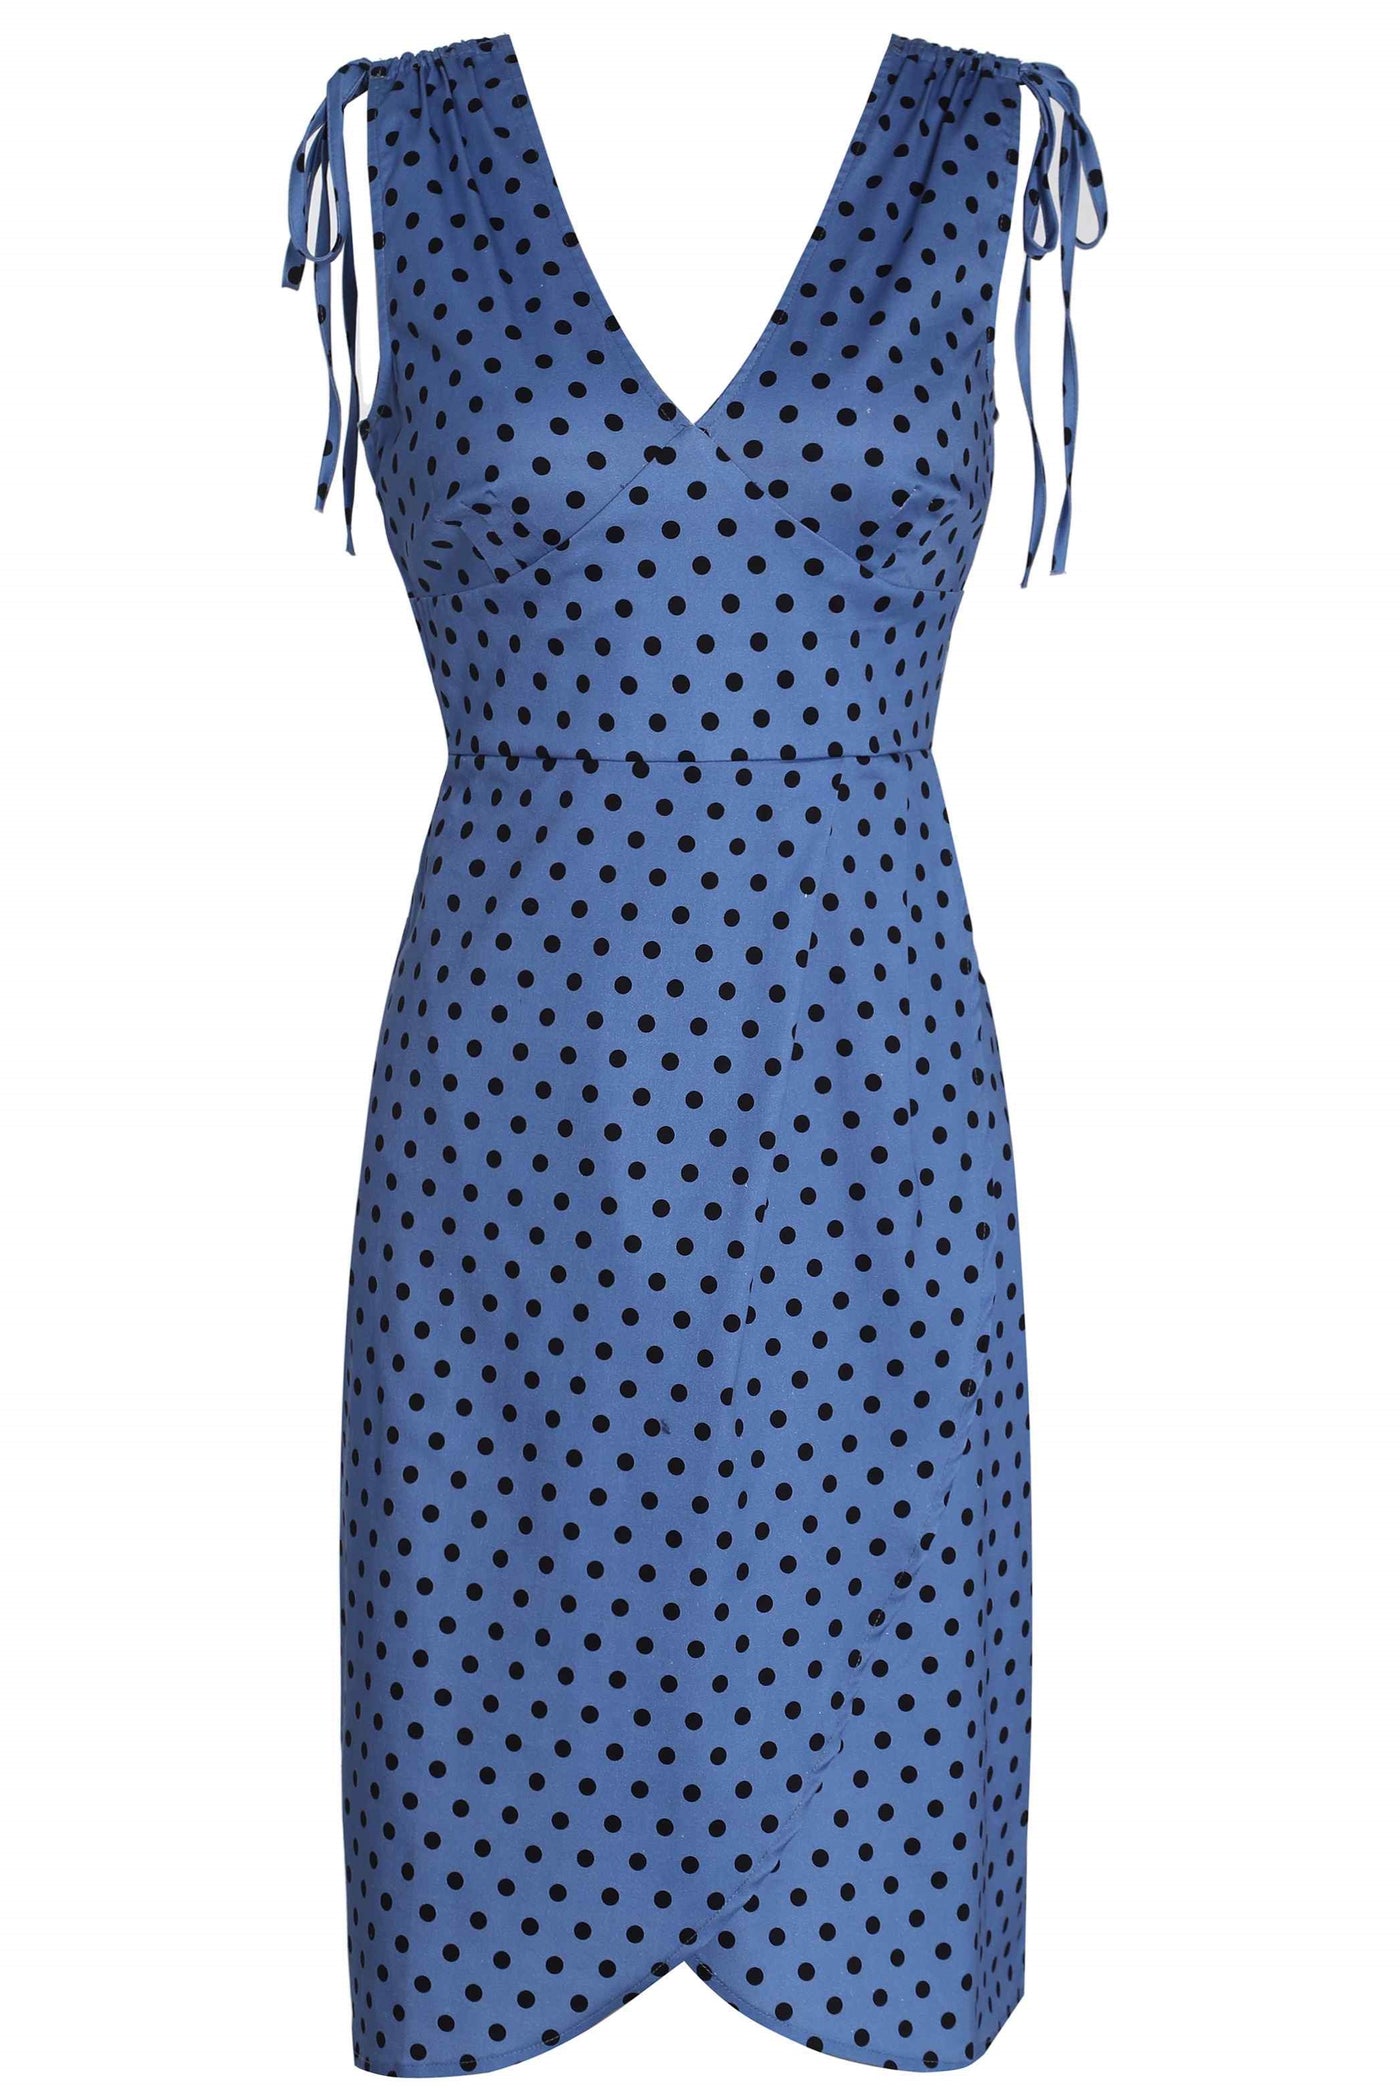 Front View of Blue Polka Dot Wiggle Dress